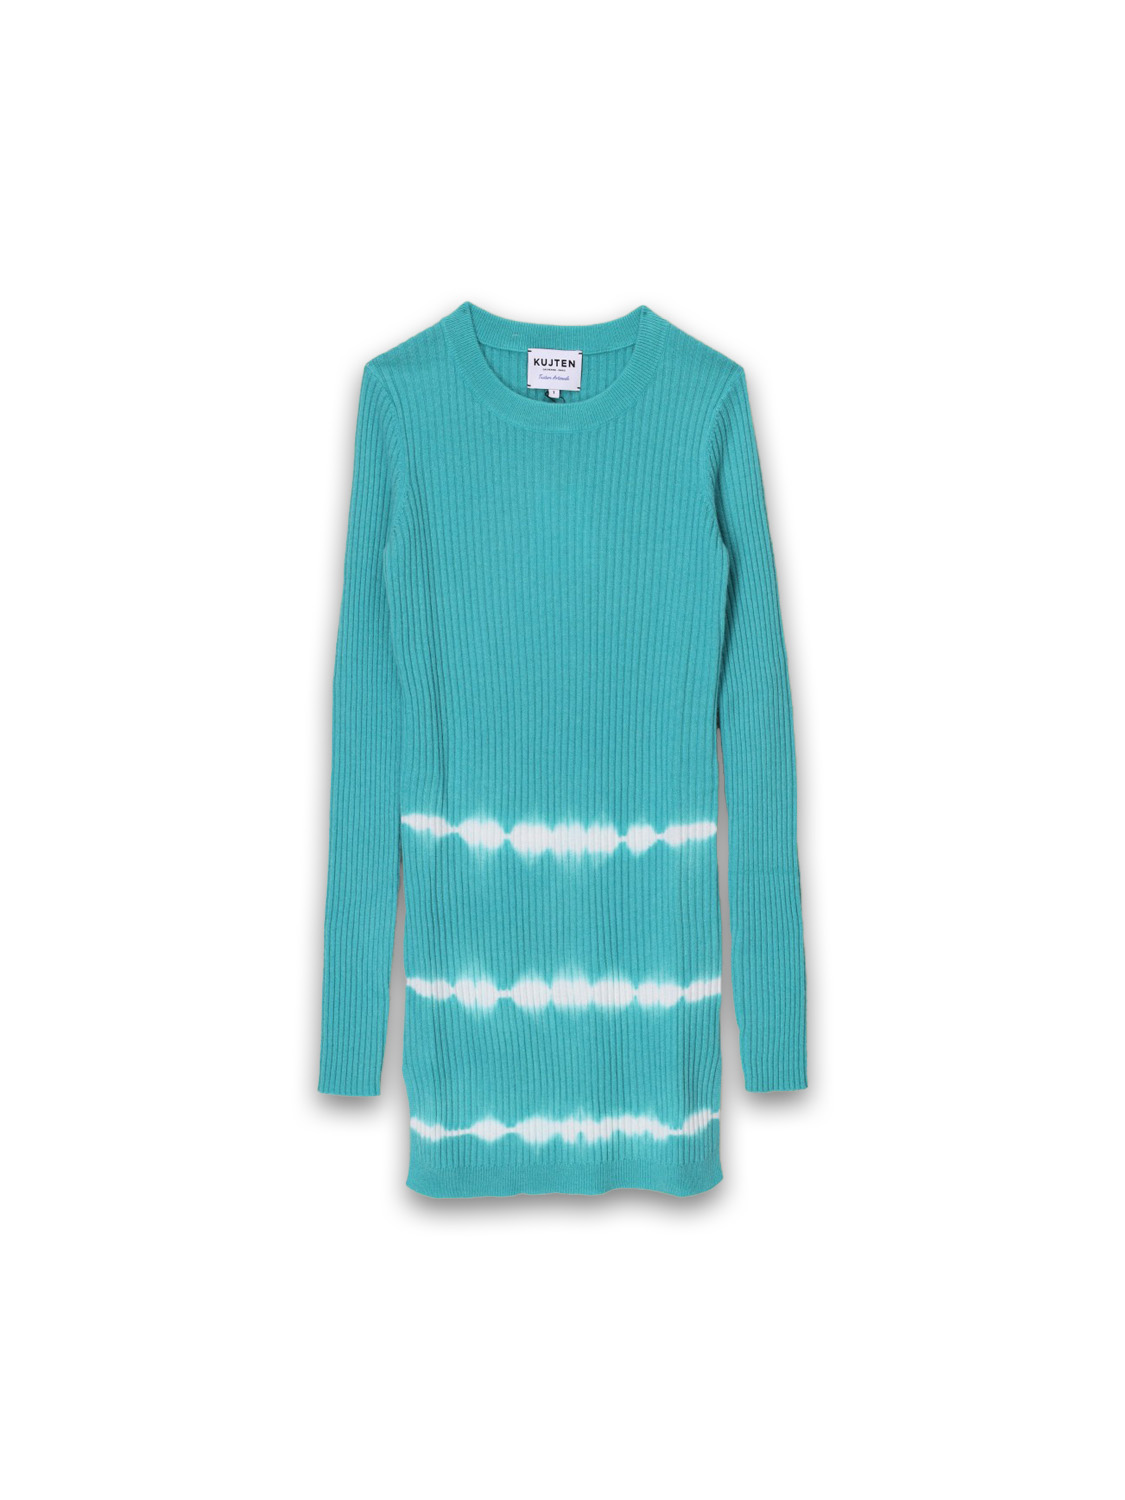 Kujten Bibili – Long ribbed cashmere sweater with tie-dye details  mint S/M